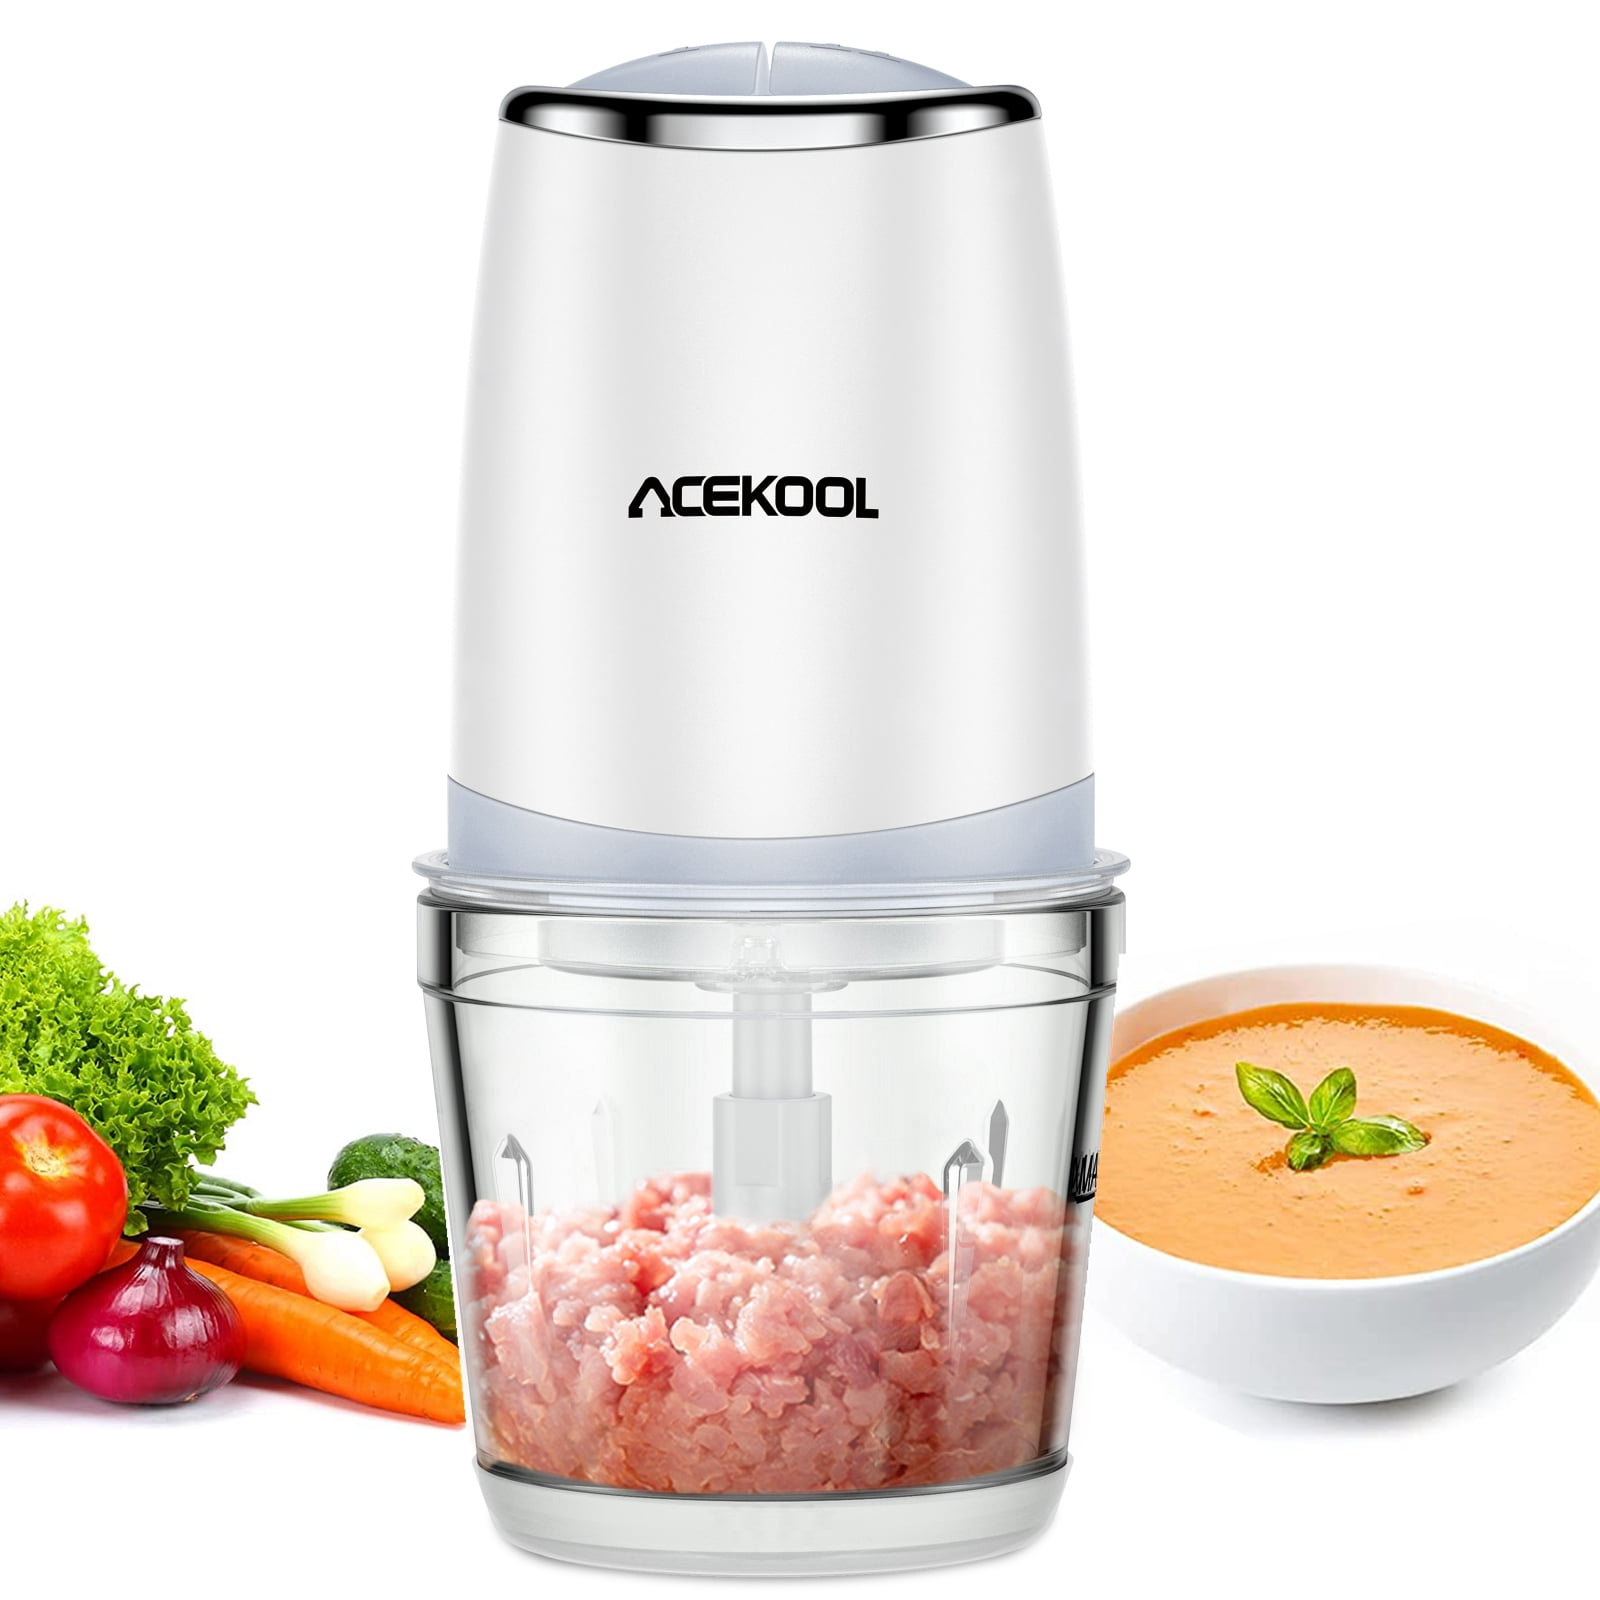 AICOOK 16 Functions Food Processor, 700W, 12-Cup Food Chopper with 4 Speeds  for Chopping, Pureeing, Mixing, Shredding, Whisking Eggs and Slicing